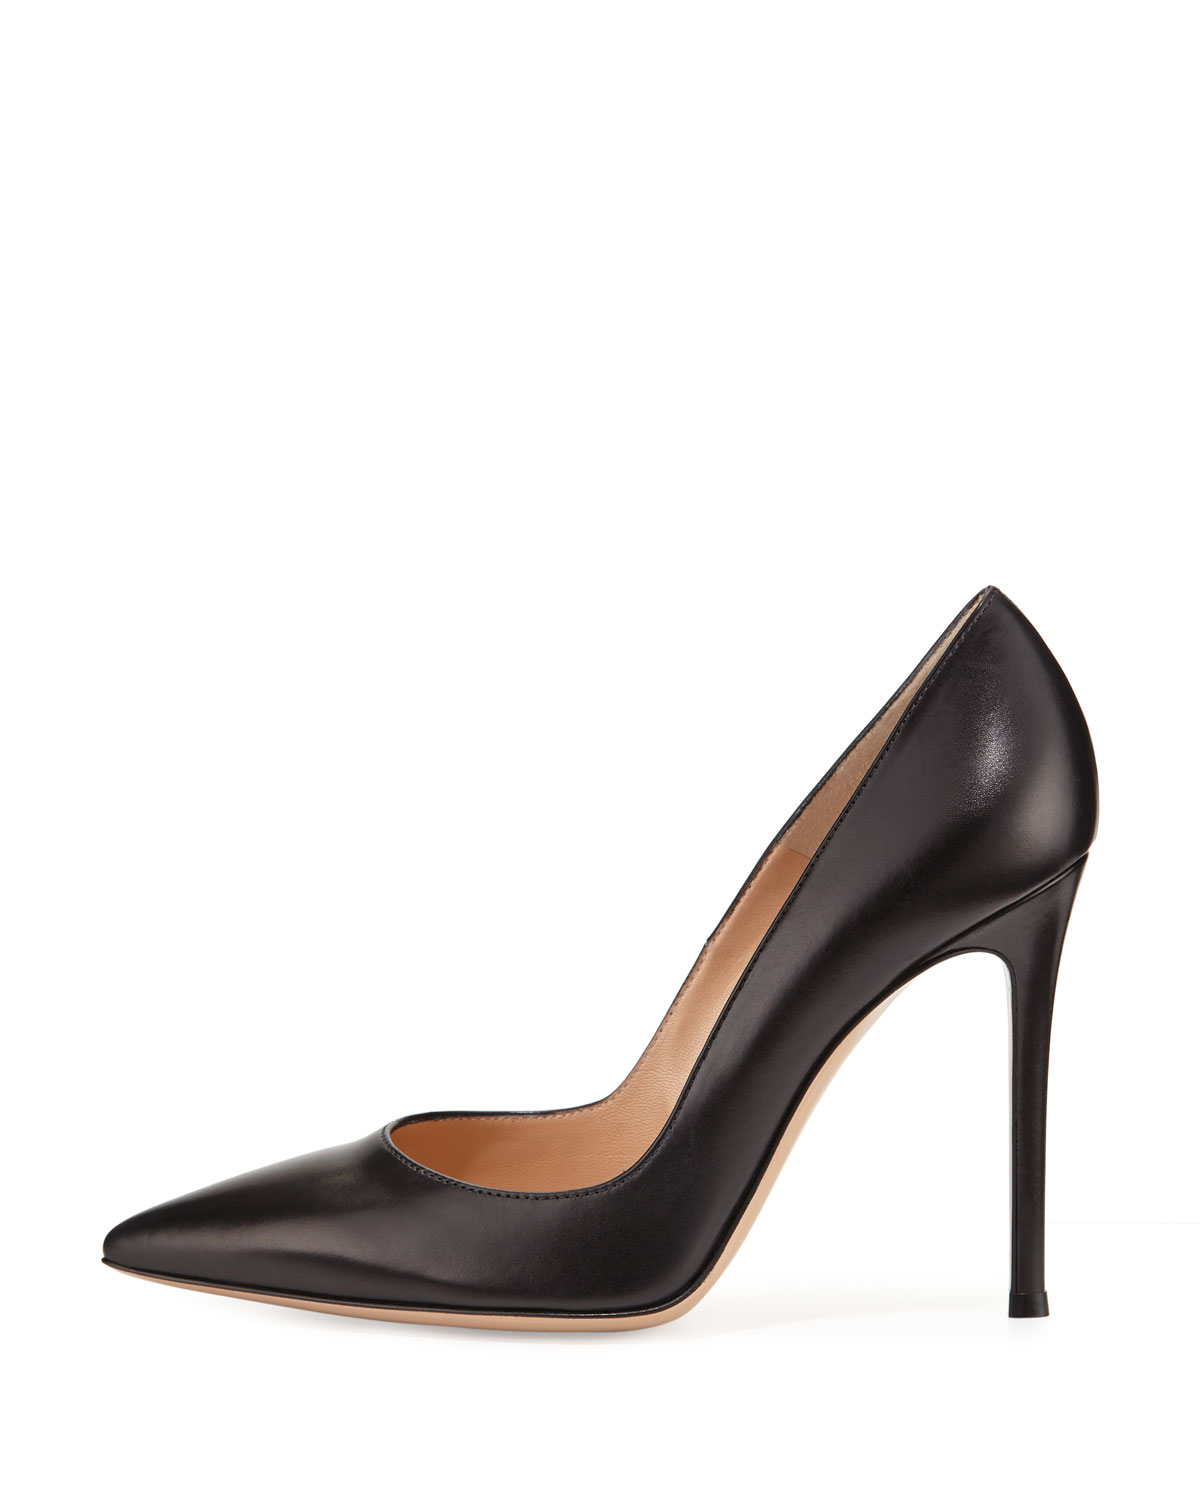 Lyst - Gianvito rossi Leather Pointed-Toe Pumps in Black